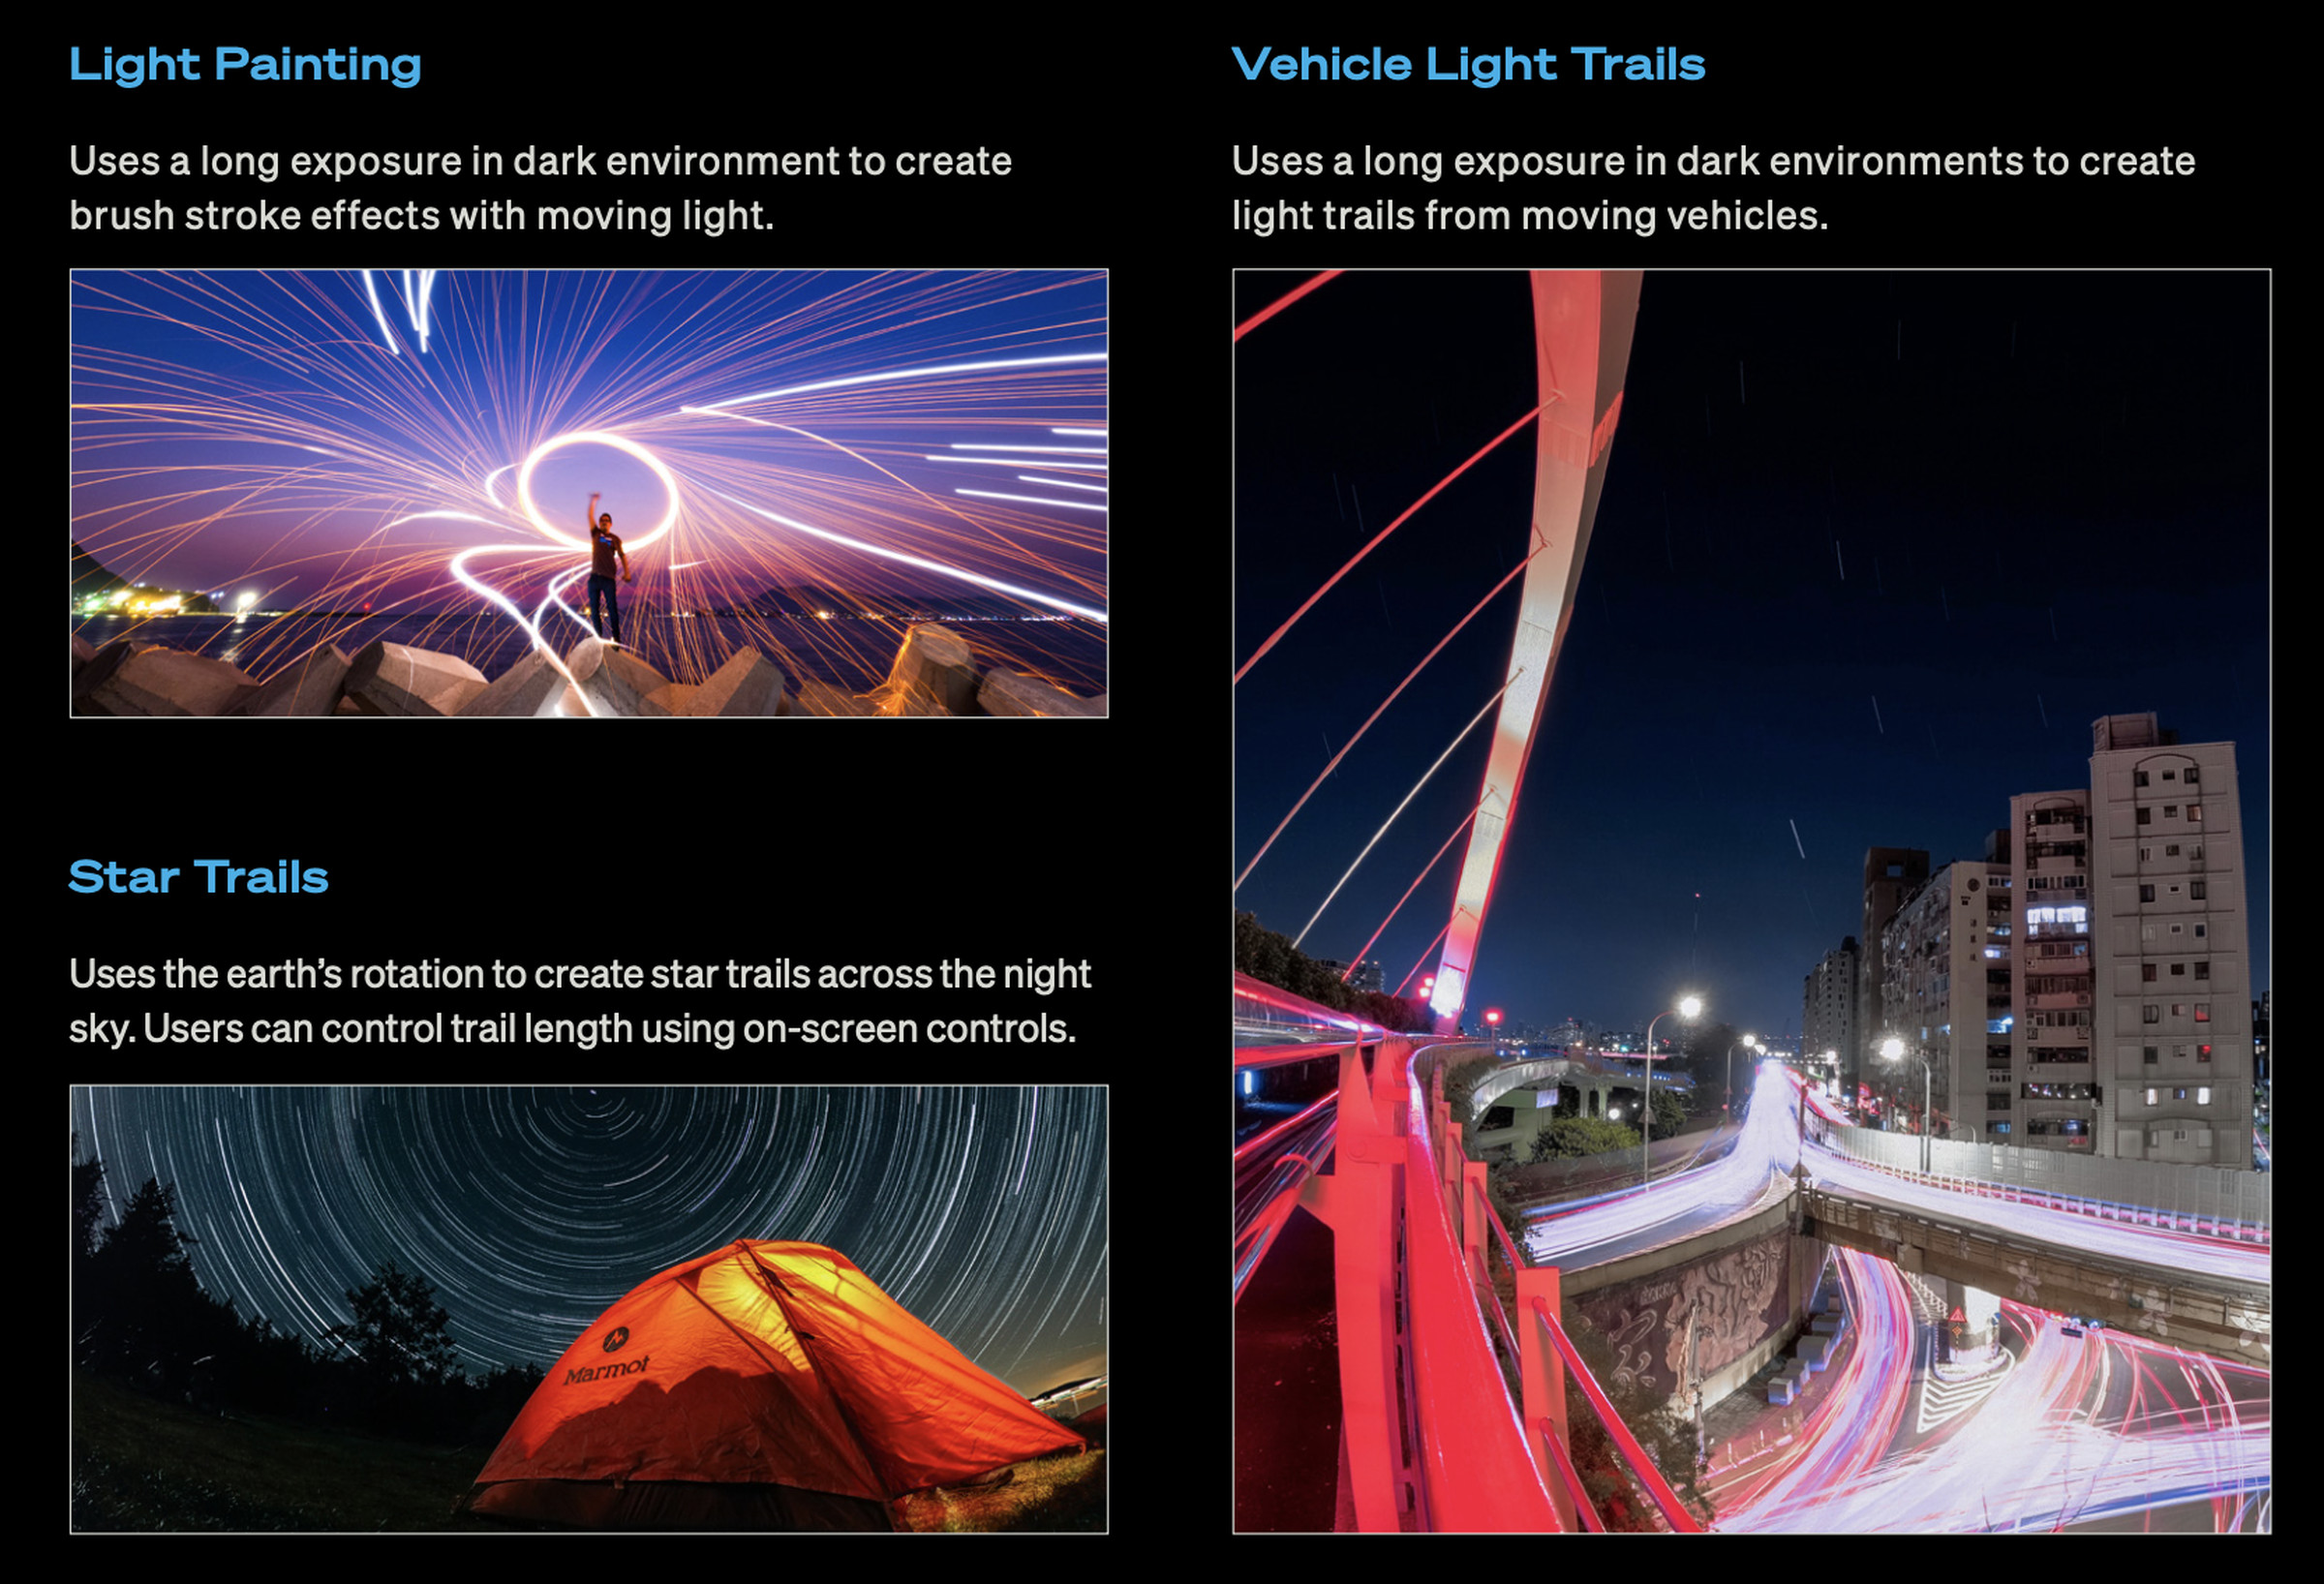 Three images showing GoPro’s night effects. The light painting mode image shows a person standing on top of rocks, having drawn a large circle made out of light. The star trails image shows a tent with a spiral of stars around it. The vehicle light trails shows a highway with lines of light across it left by cars driving along it.